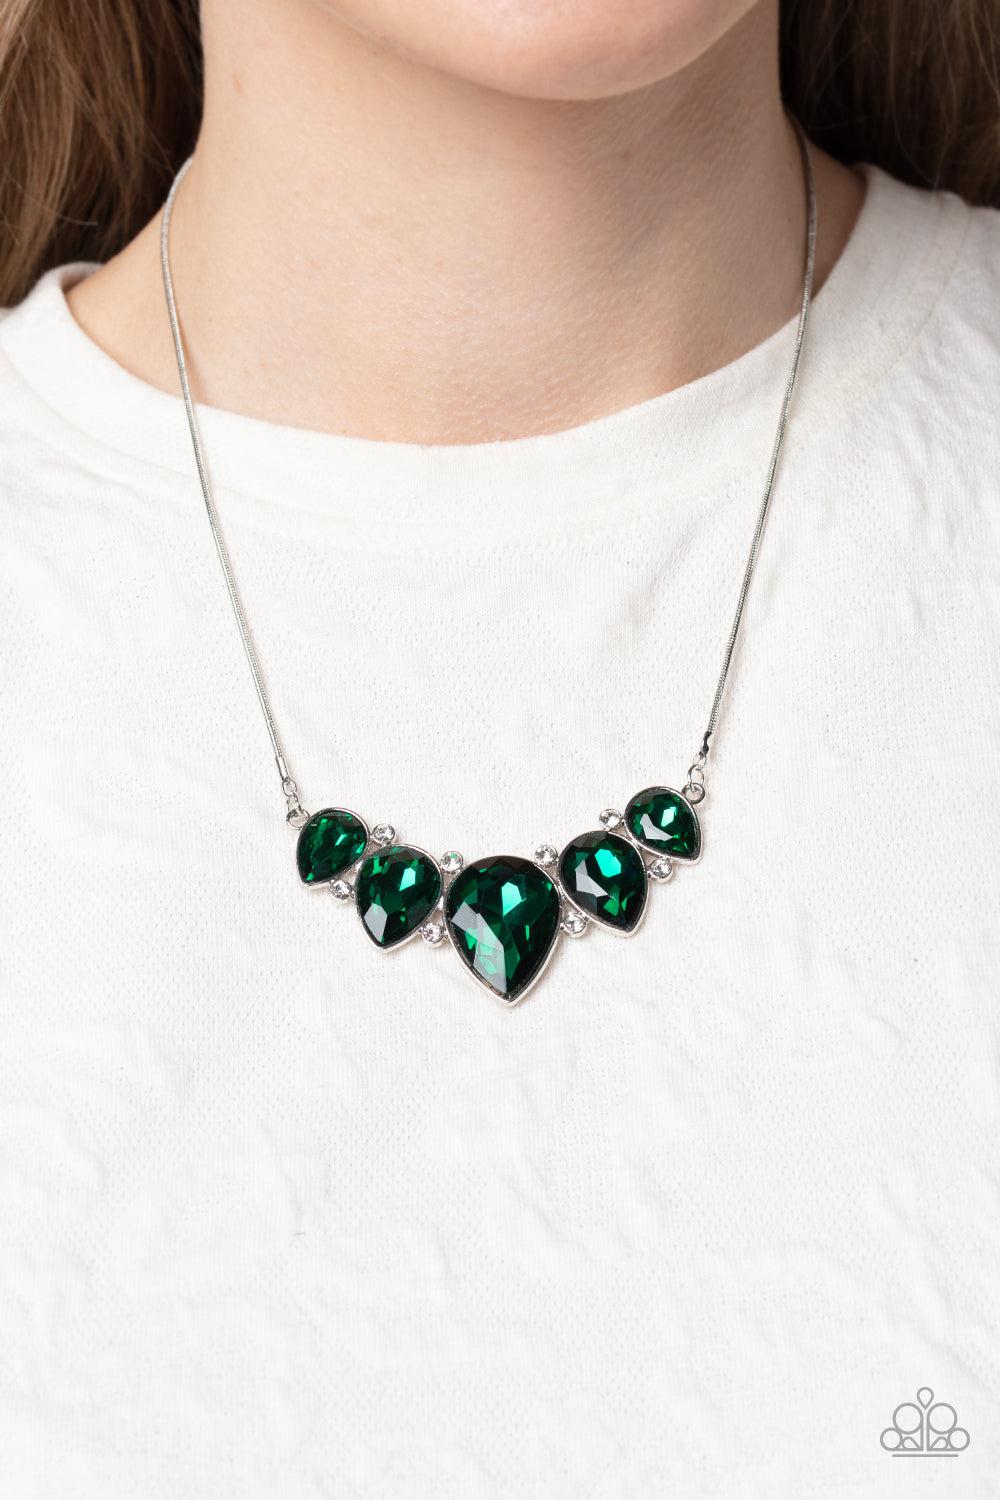 Regally Refined Green Rhinestone Necklace - Paparazzi Accessories-on model - CarasShop.com - $5 Jewelry by Cara Jewels